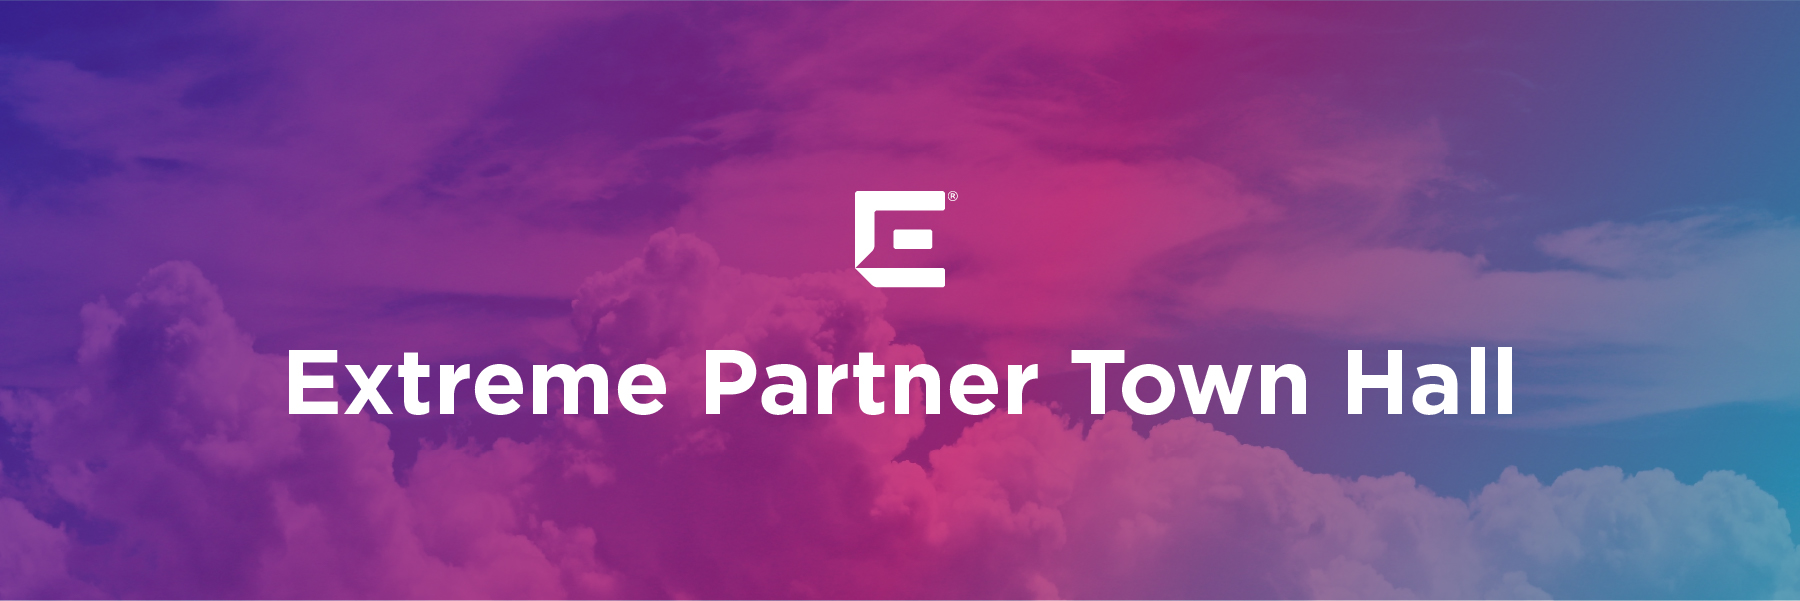 Extreme Partner Town Hall